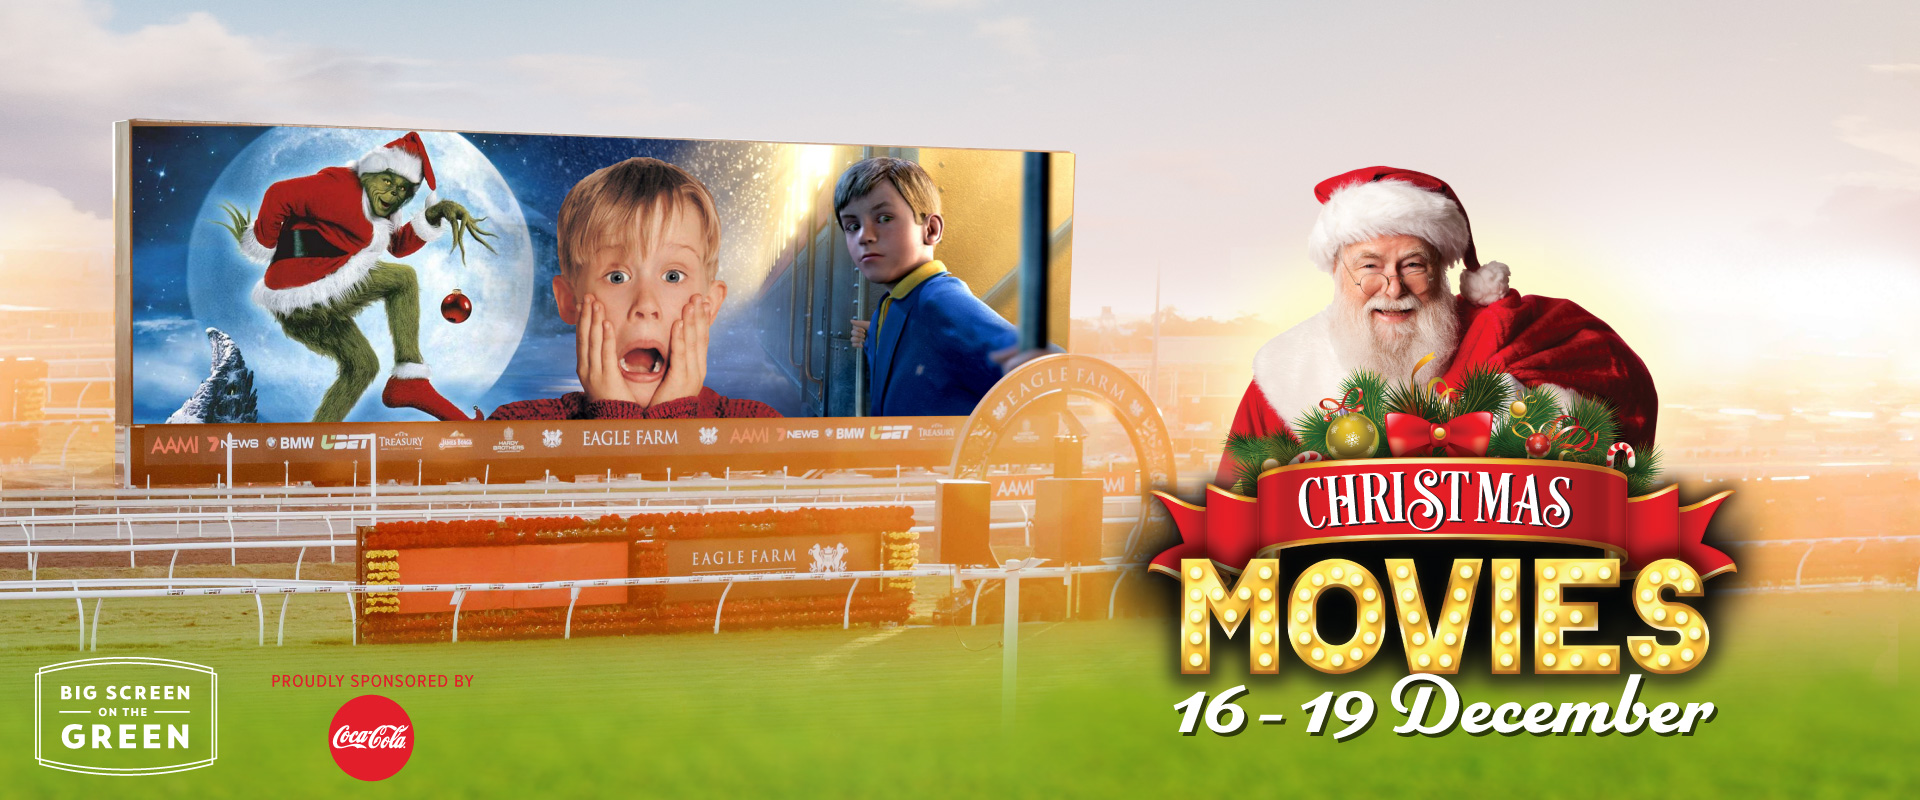 Christmas Movies on the Big Screen on the Green